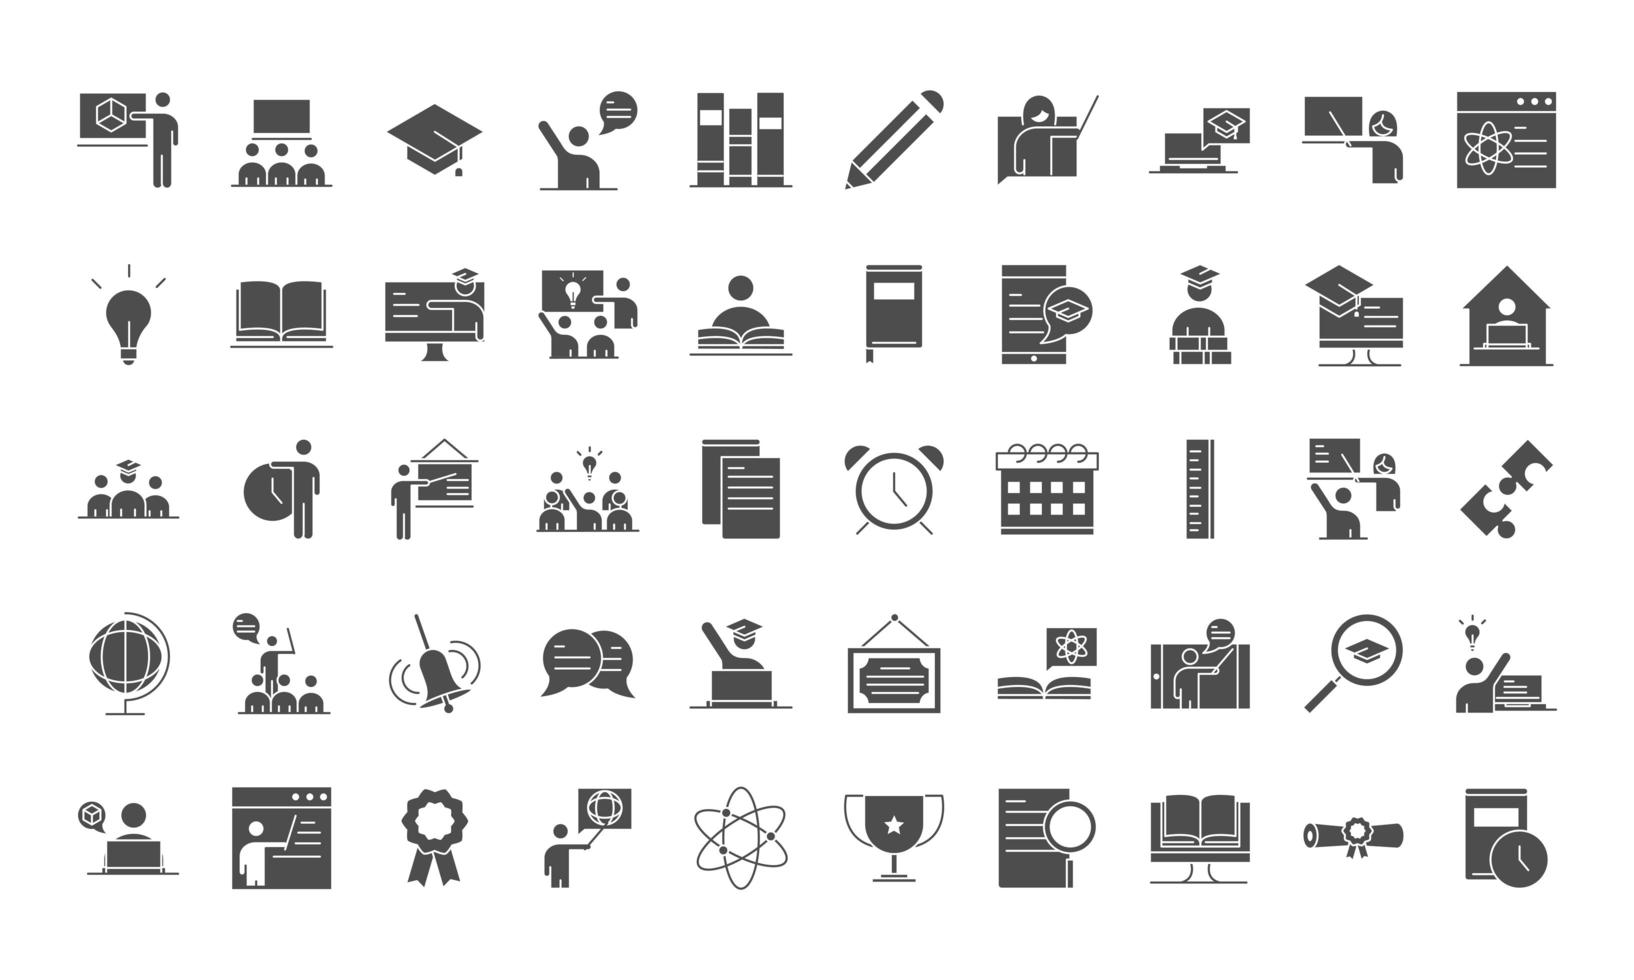 teach school education learn knowledge and training icons set silhouette style icon vector